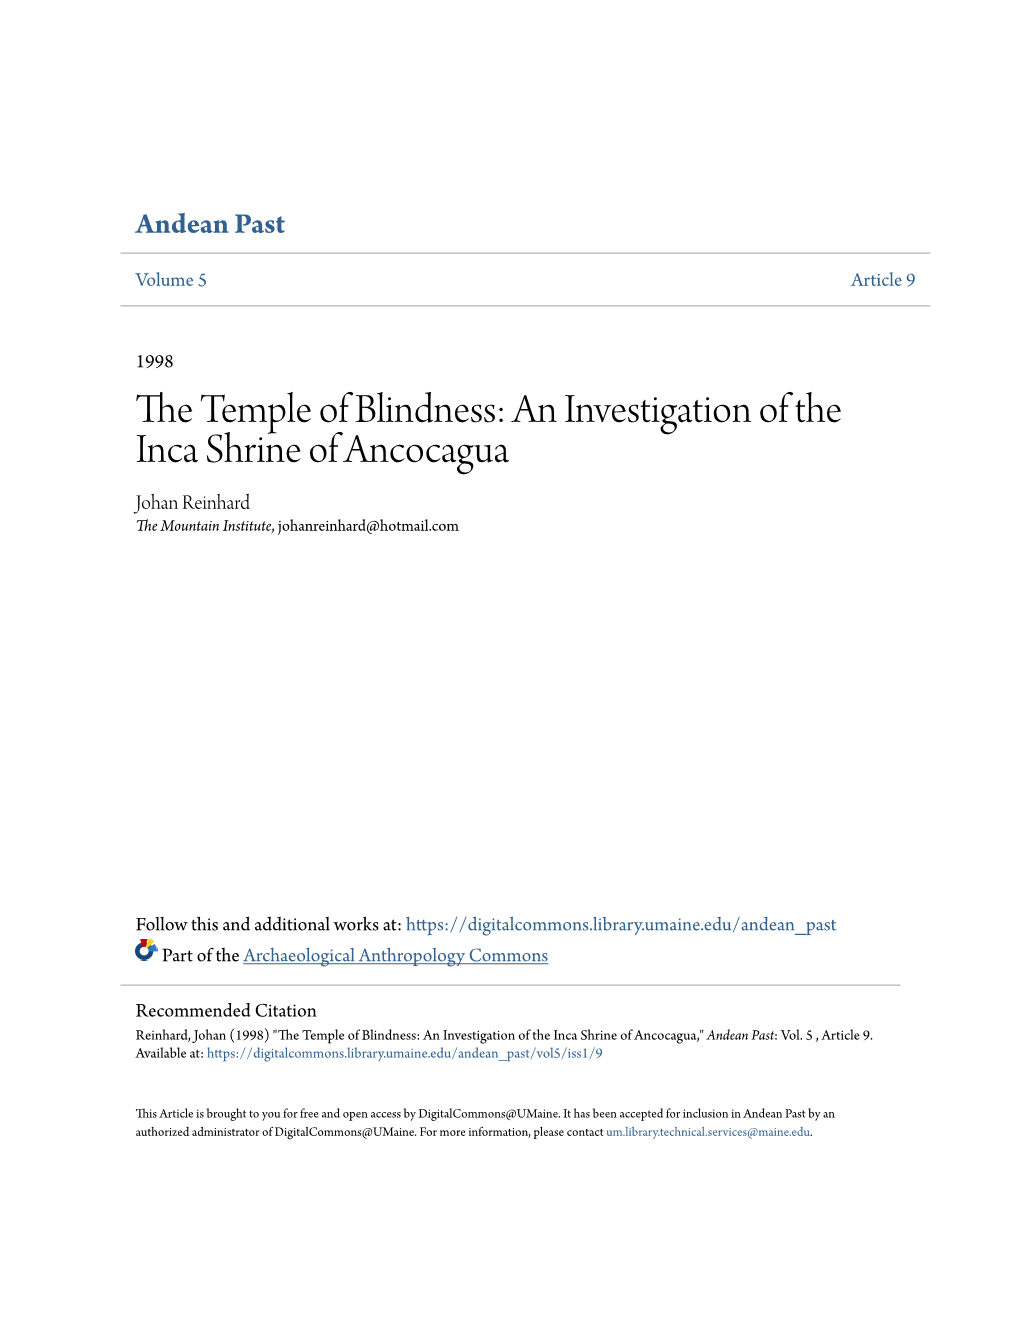 The Temple of Blindness: an Investigation of the Inca Shrine of Ancocagua